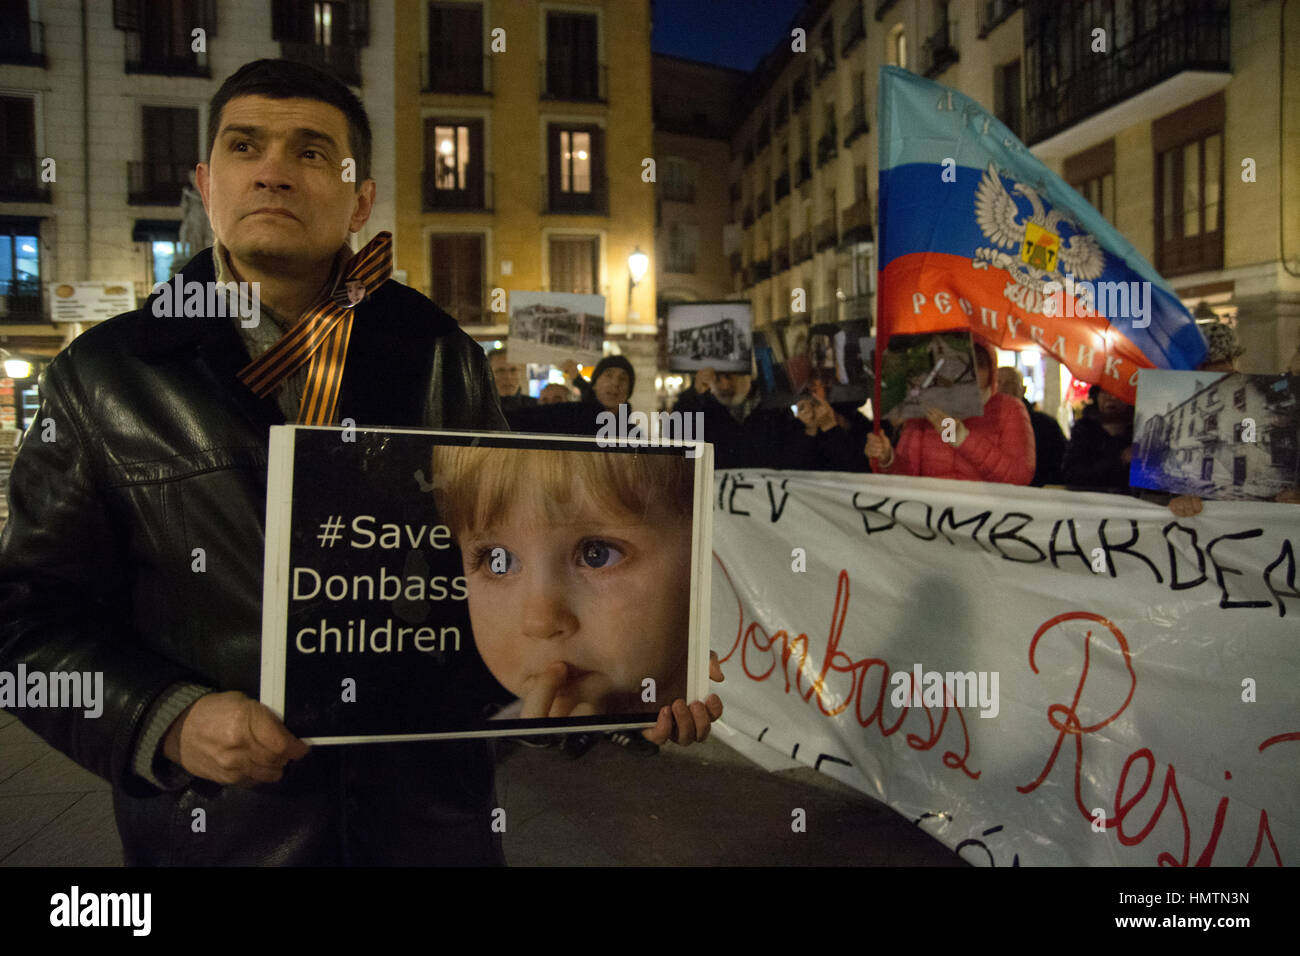 Madrid, Spain. 5th Feb, 2017. A man protests against bombings in Donbass by the Ukrainian army and for the participation by military units and experts from NATO countries. Credit: Marcos del Mazo/Alamy Live News Stock Photo